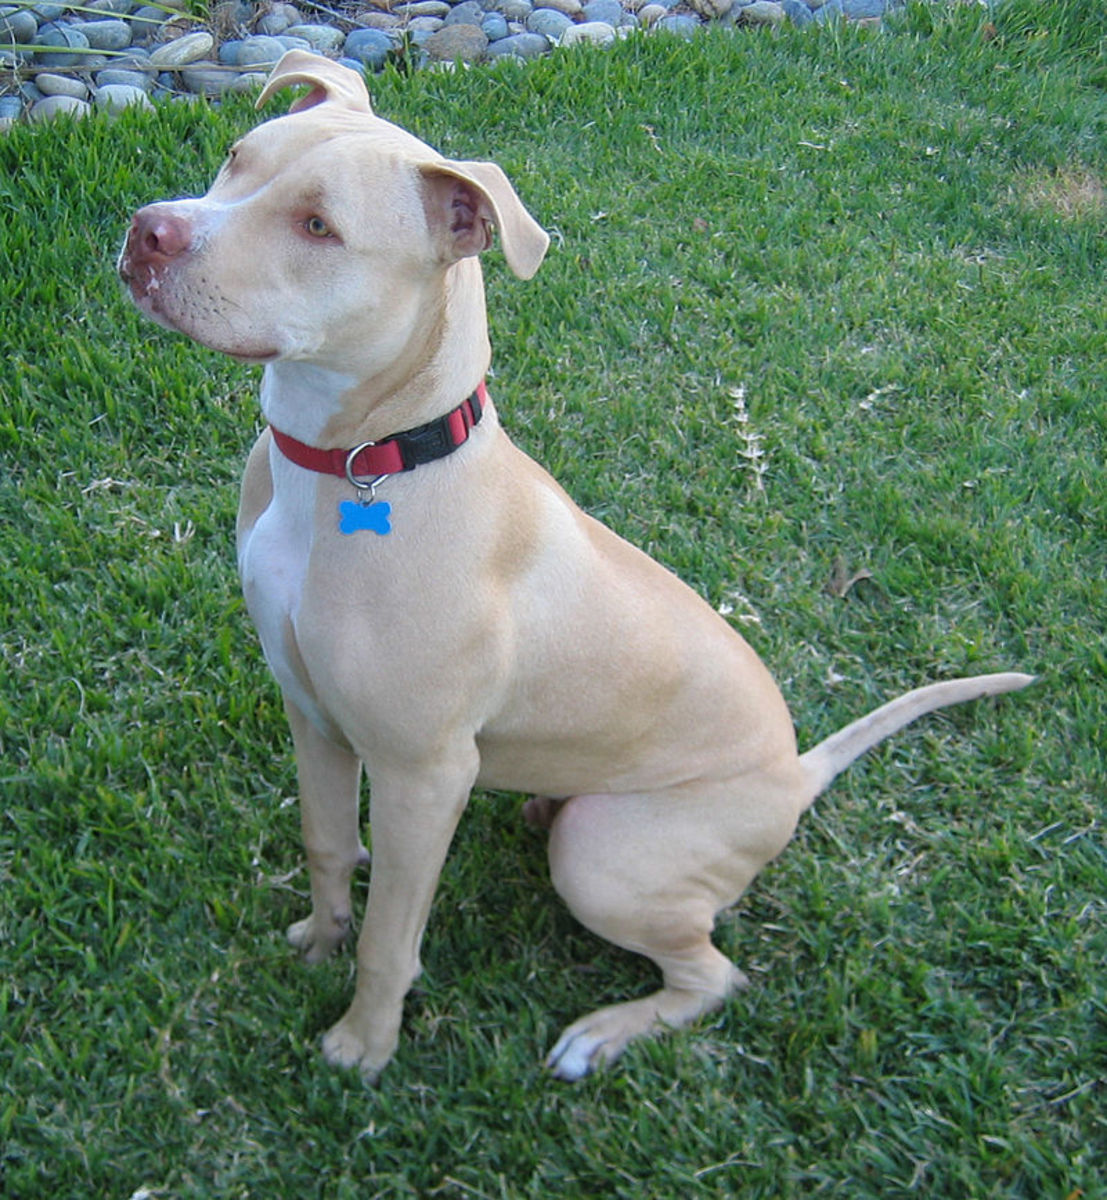 Despite their fierce reputation, the American Pit Bull Terrier is actually a highly intelligent and affectionate breed.